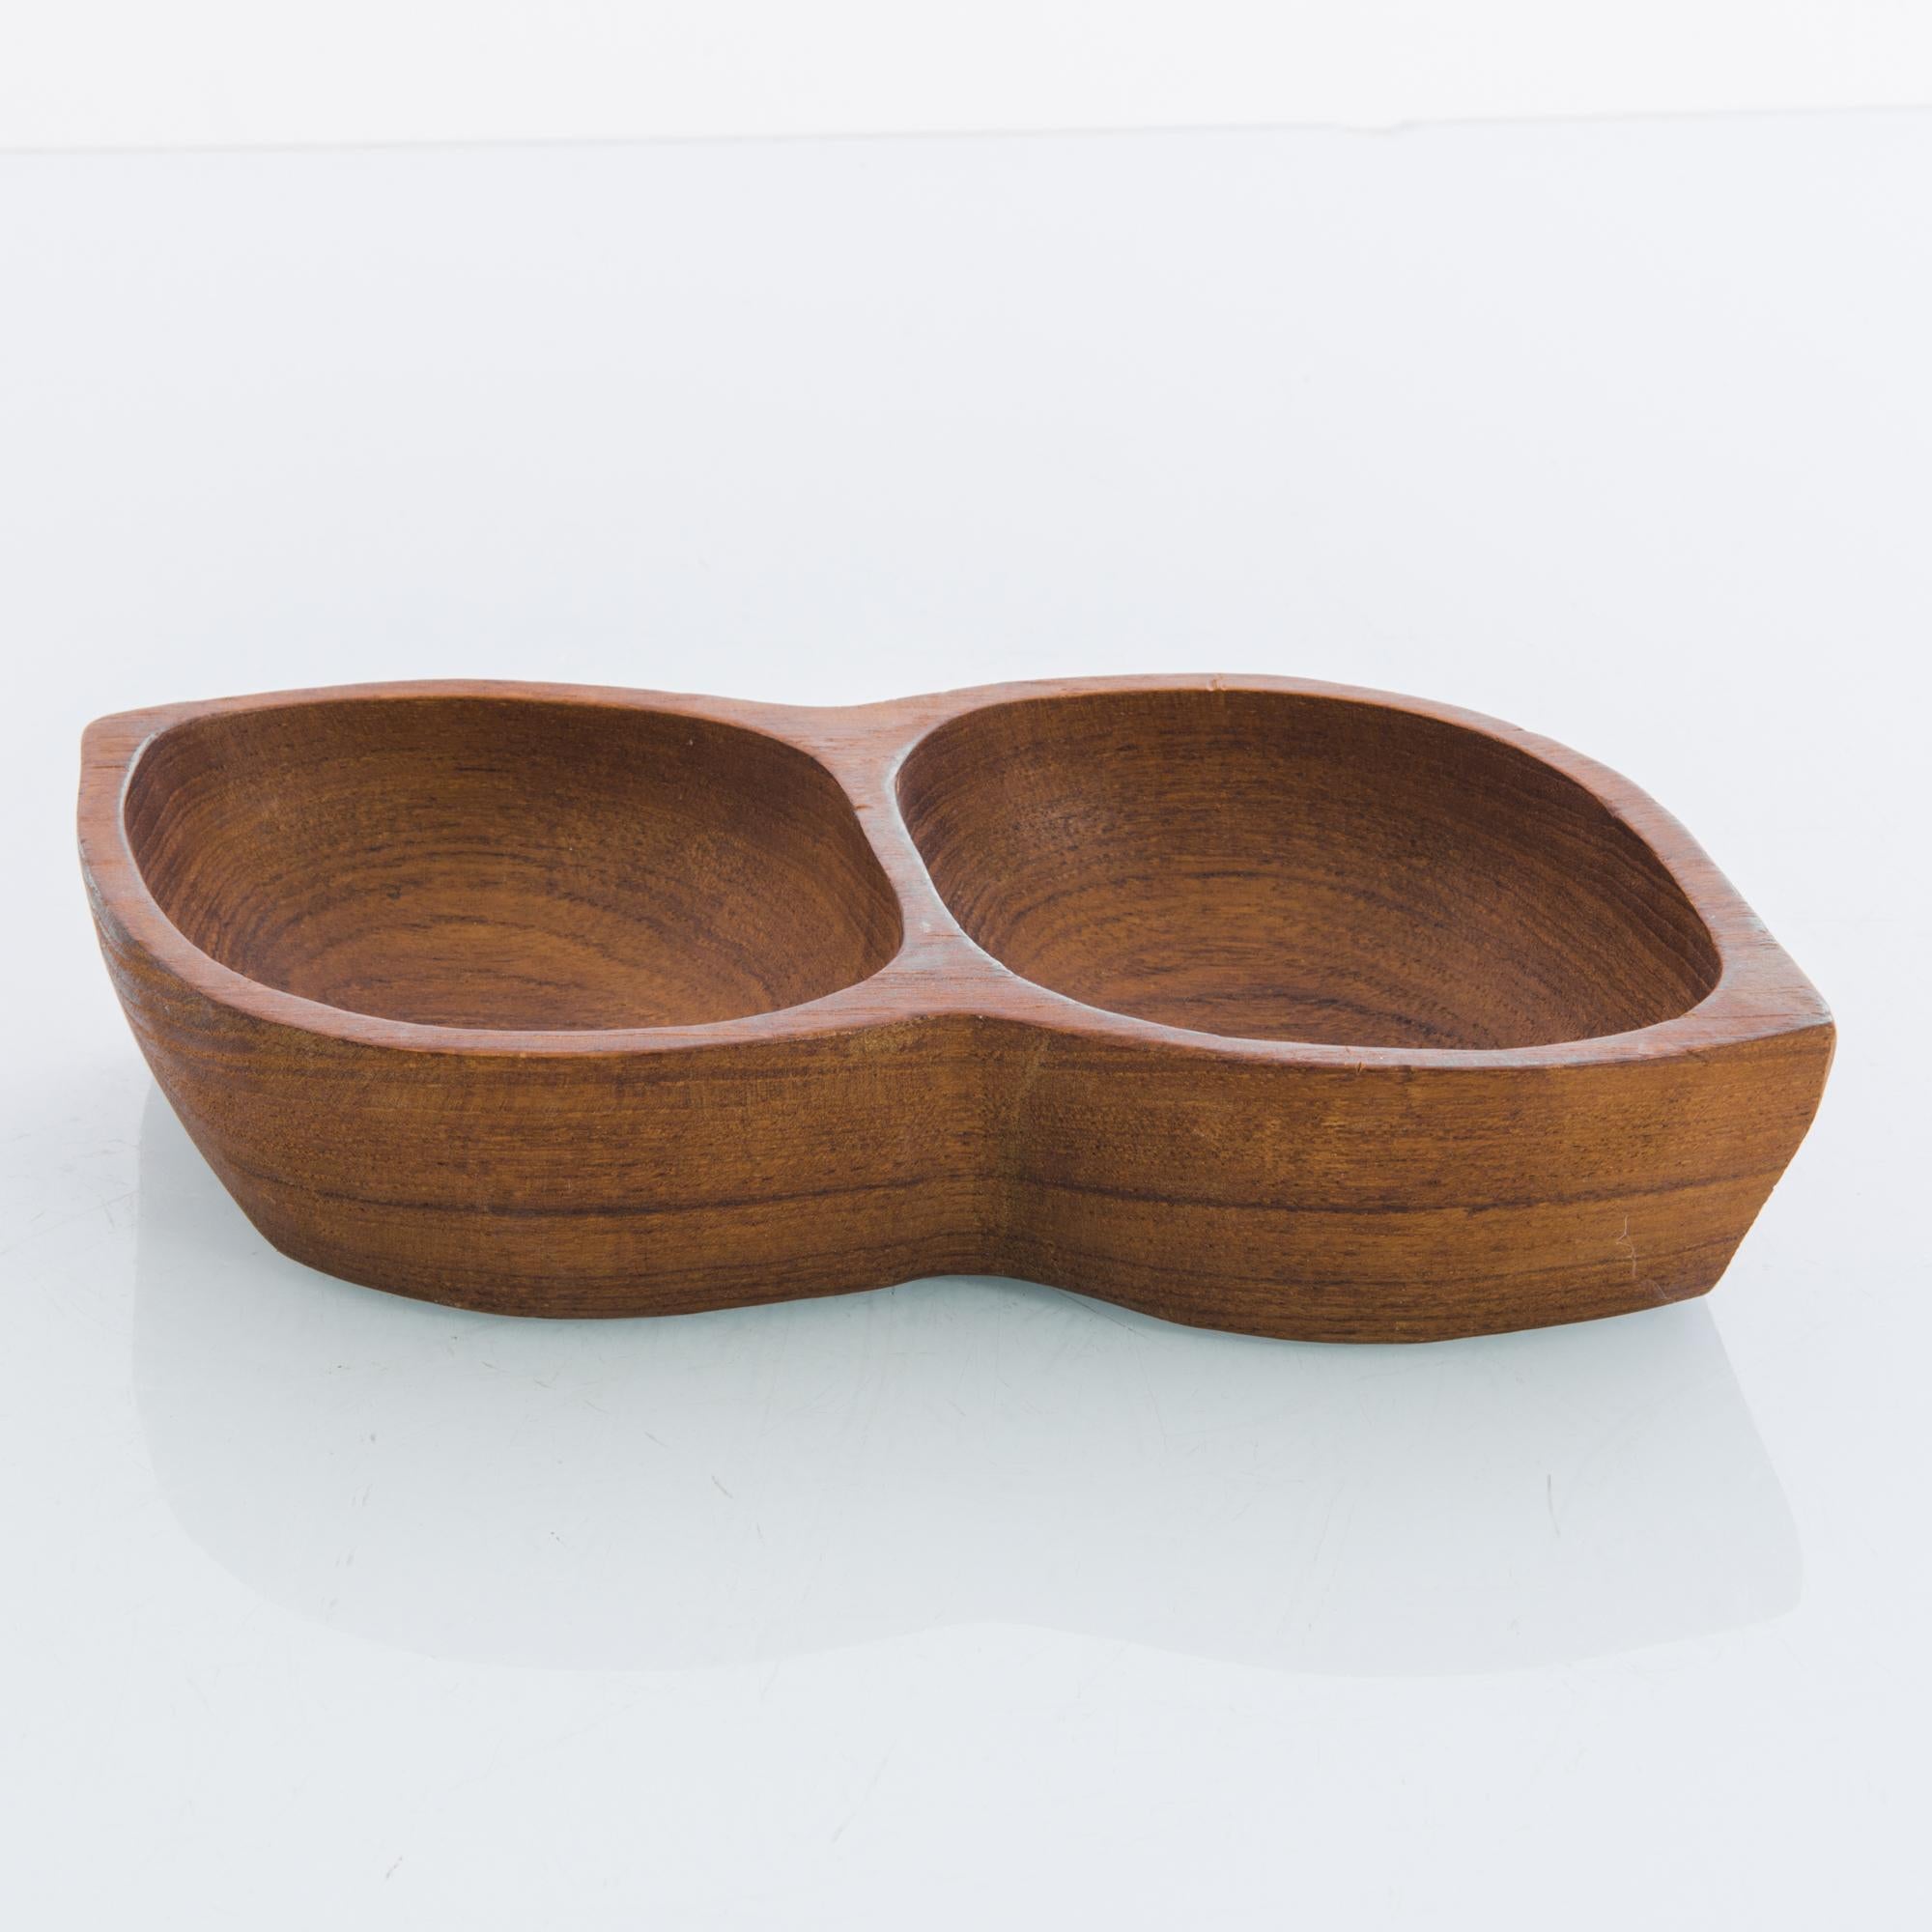 A wooden bowl from 1970s Denmark in the shape of a bean pod. Two partitions of the bowl, like two peas in a pod, mimic the natural form of the bean. The wood has a rich color with warm reddish tones and a dark grain, brought out by a fine polish.